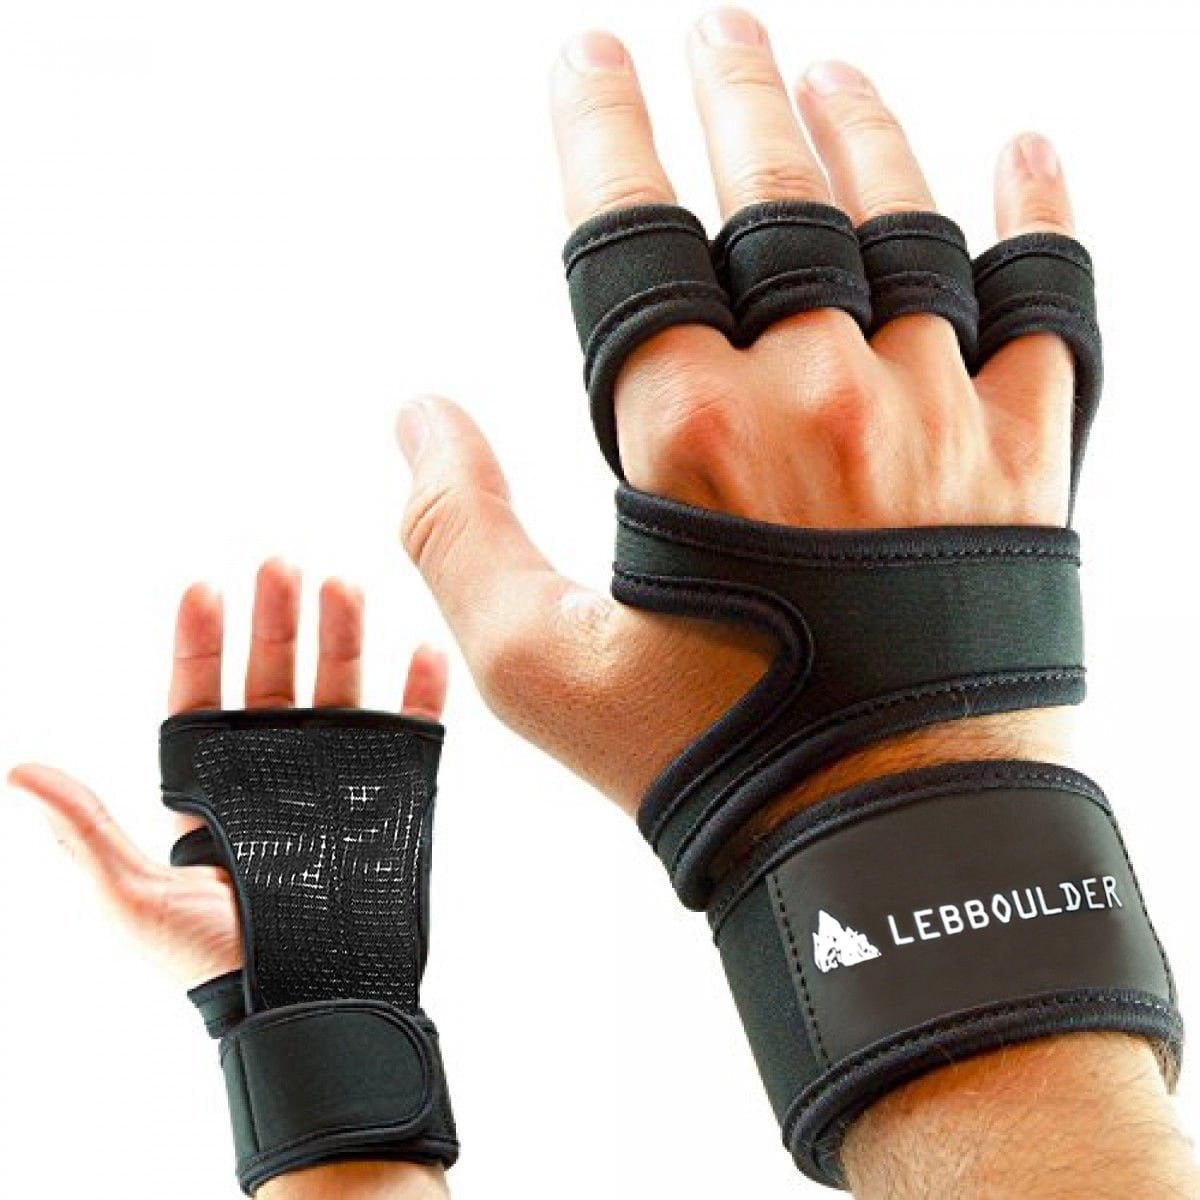 Crossfit Grip Leather Palm Gloves Wrist Support Powerlifting Gloves Wraps 